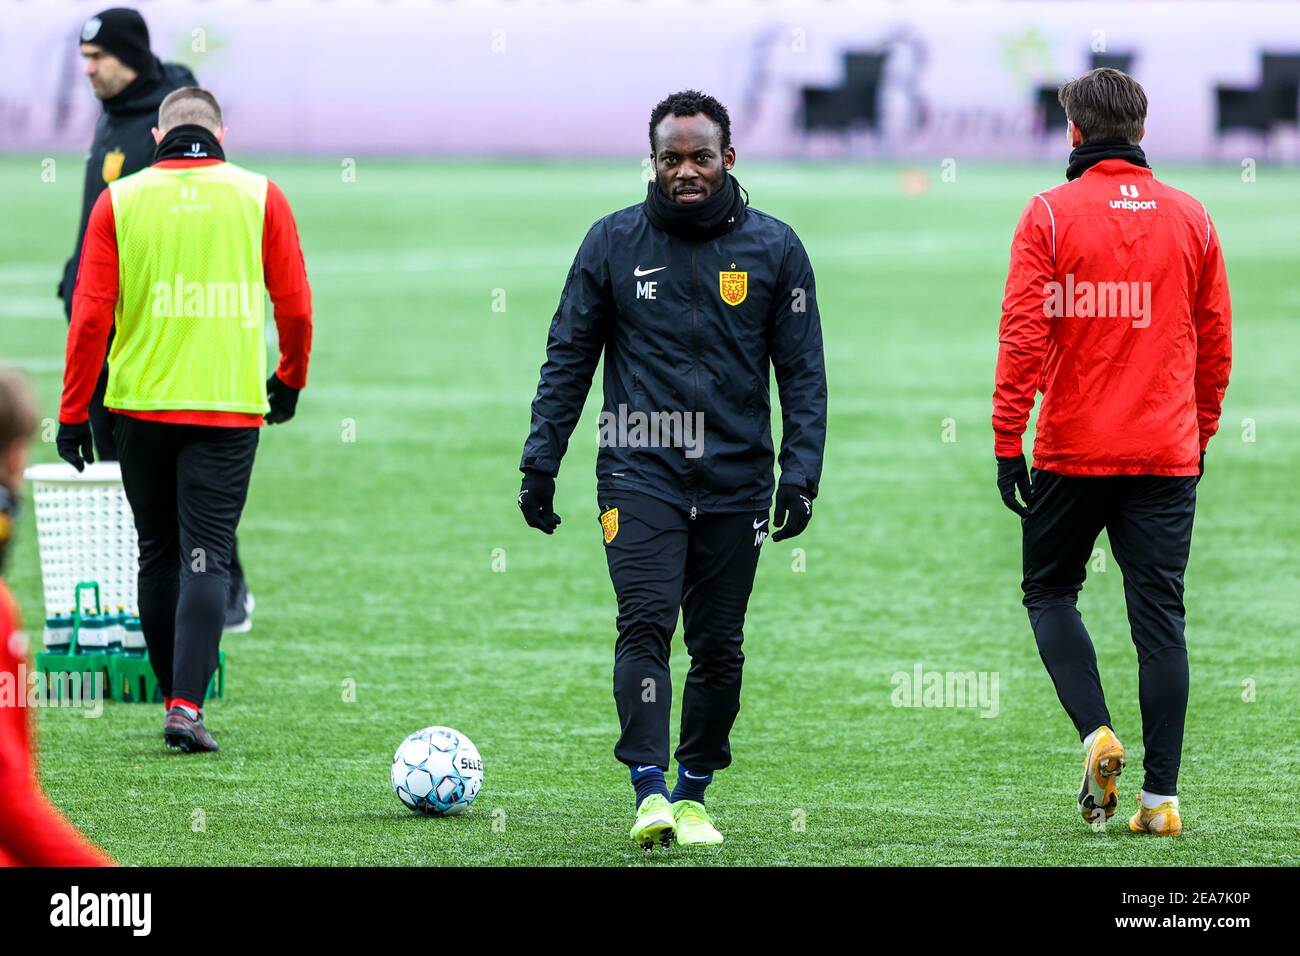 Farum, Denmark. 7th Feb, 2021. Michael Essien of FC Nordsjaelland seen during warm-up before the 3F Superliga match between FC Nordsjaelland and Odense Boldklub in Right to Dream Park in Farum. (Photo Credit: Gonzales Photo/Alamy Live News Stock Photo